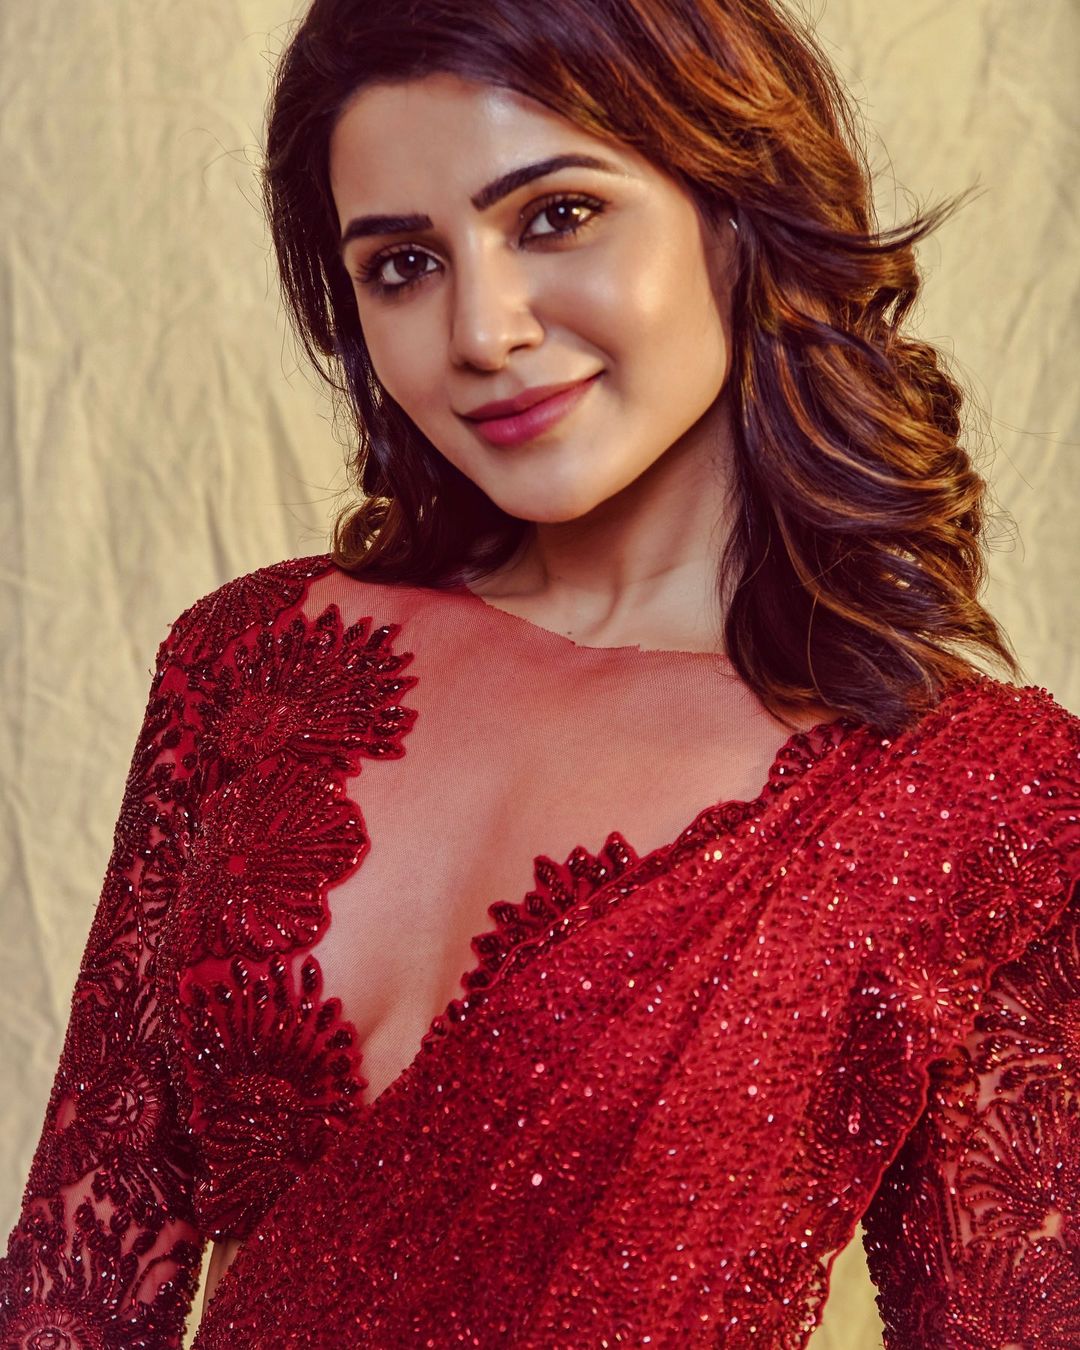 8 Things You Didn't Know About Samantha Ruth Prabhu